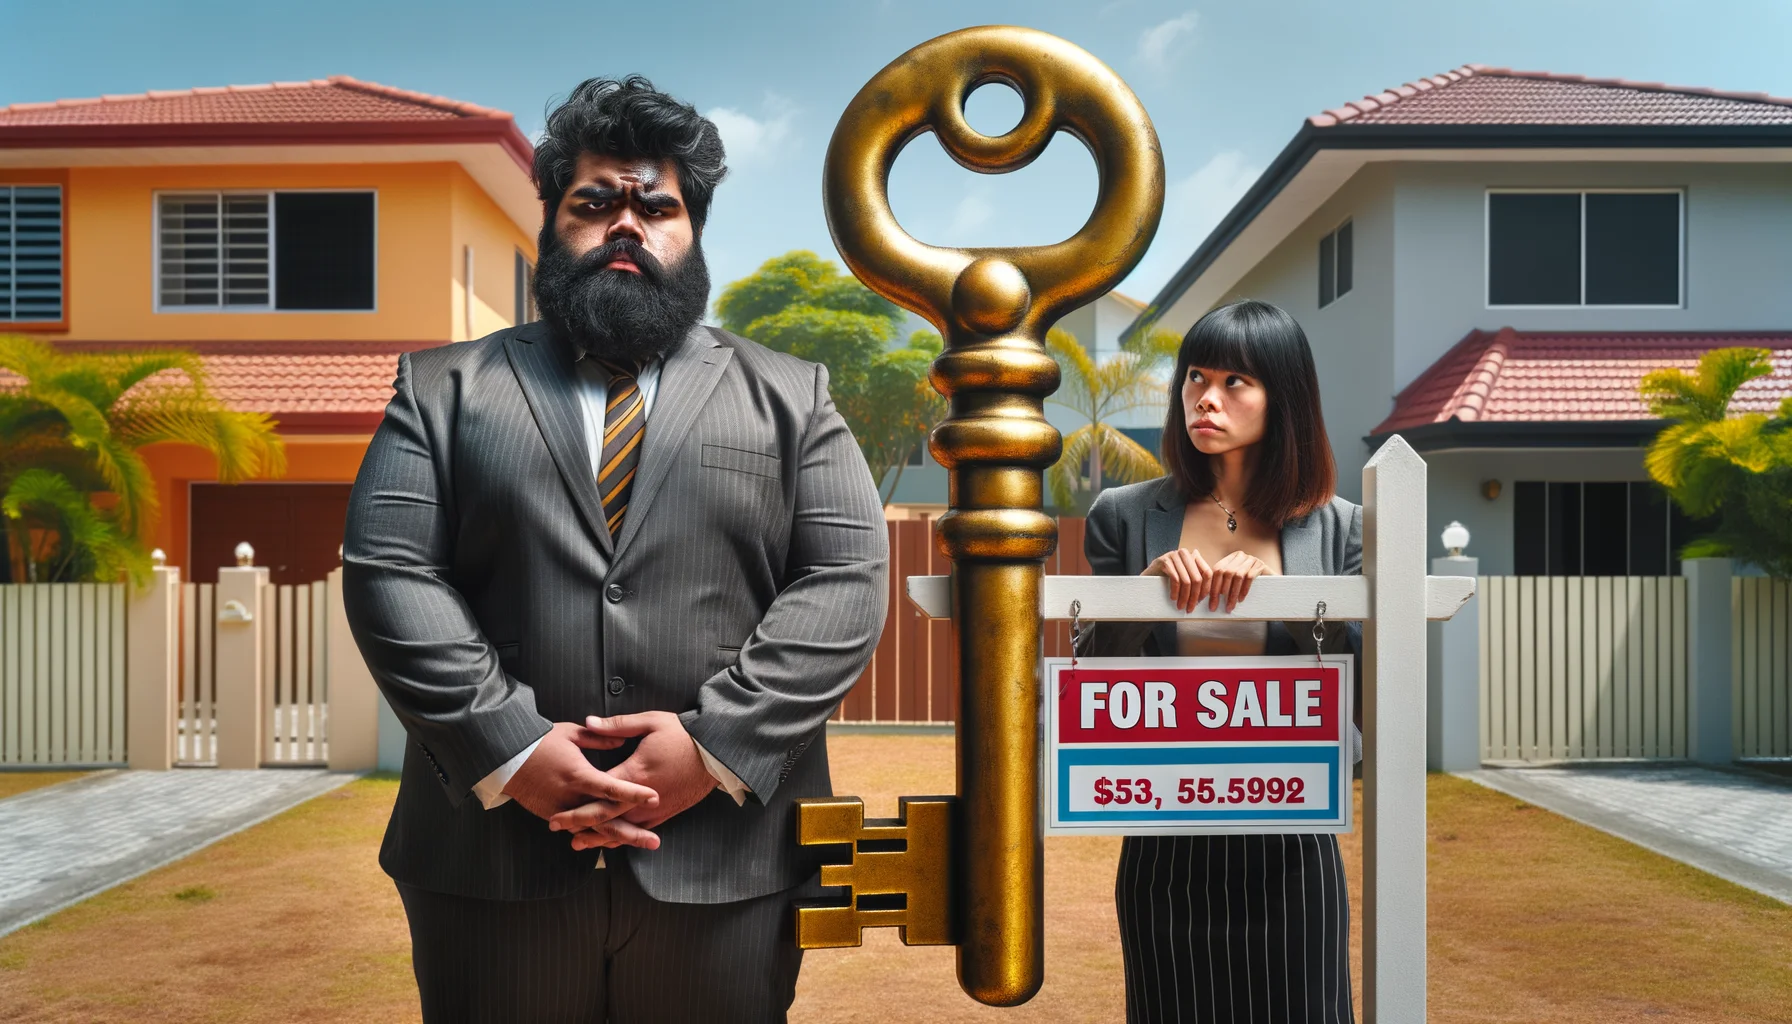 Generate an amusing scene that features a South Asian female investment real estate broker and a Hispanic male client. The broker, dressed in professional attire, is seen carrying an enormous golden key, symbolizing the keys to a houses she's selling. The client, a typically serious character, wears a bewildered expression due to the exaggerated size of the key. They are standing in front of a 'For Sale' sign, which is amusingly leaning towards the ground due to the weight of giant key hanging on it. The backdrop is a colourful suburban neighbourhood in the midday sunlight.